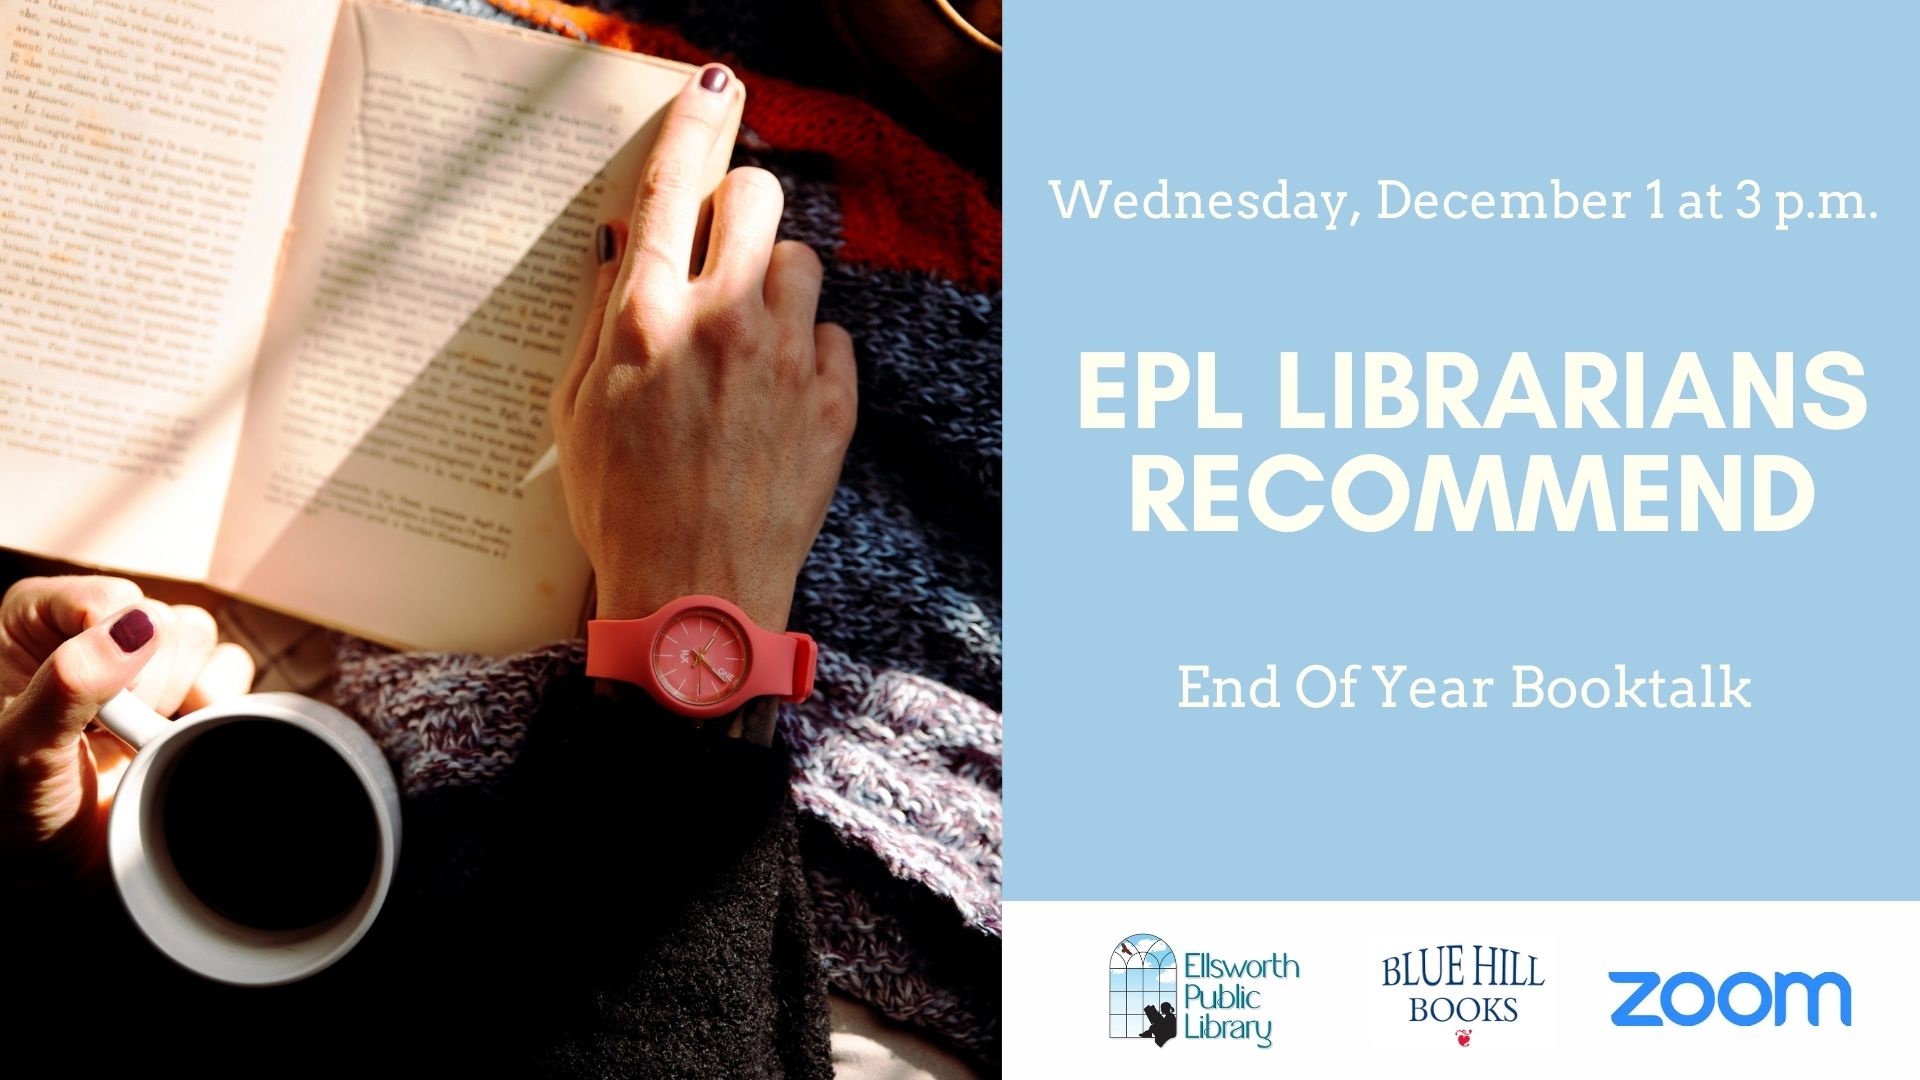 EPL Librarians Recommend